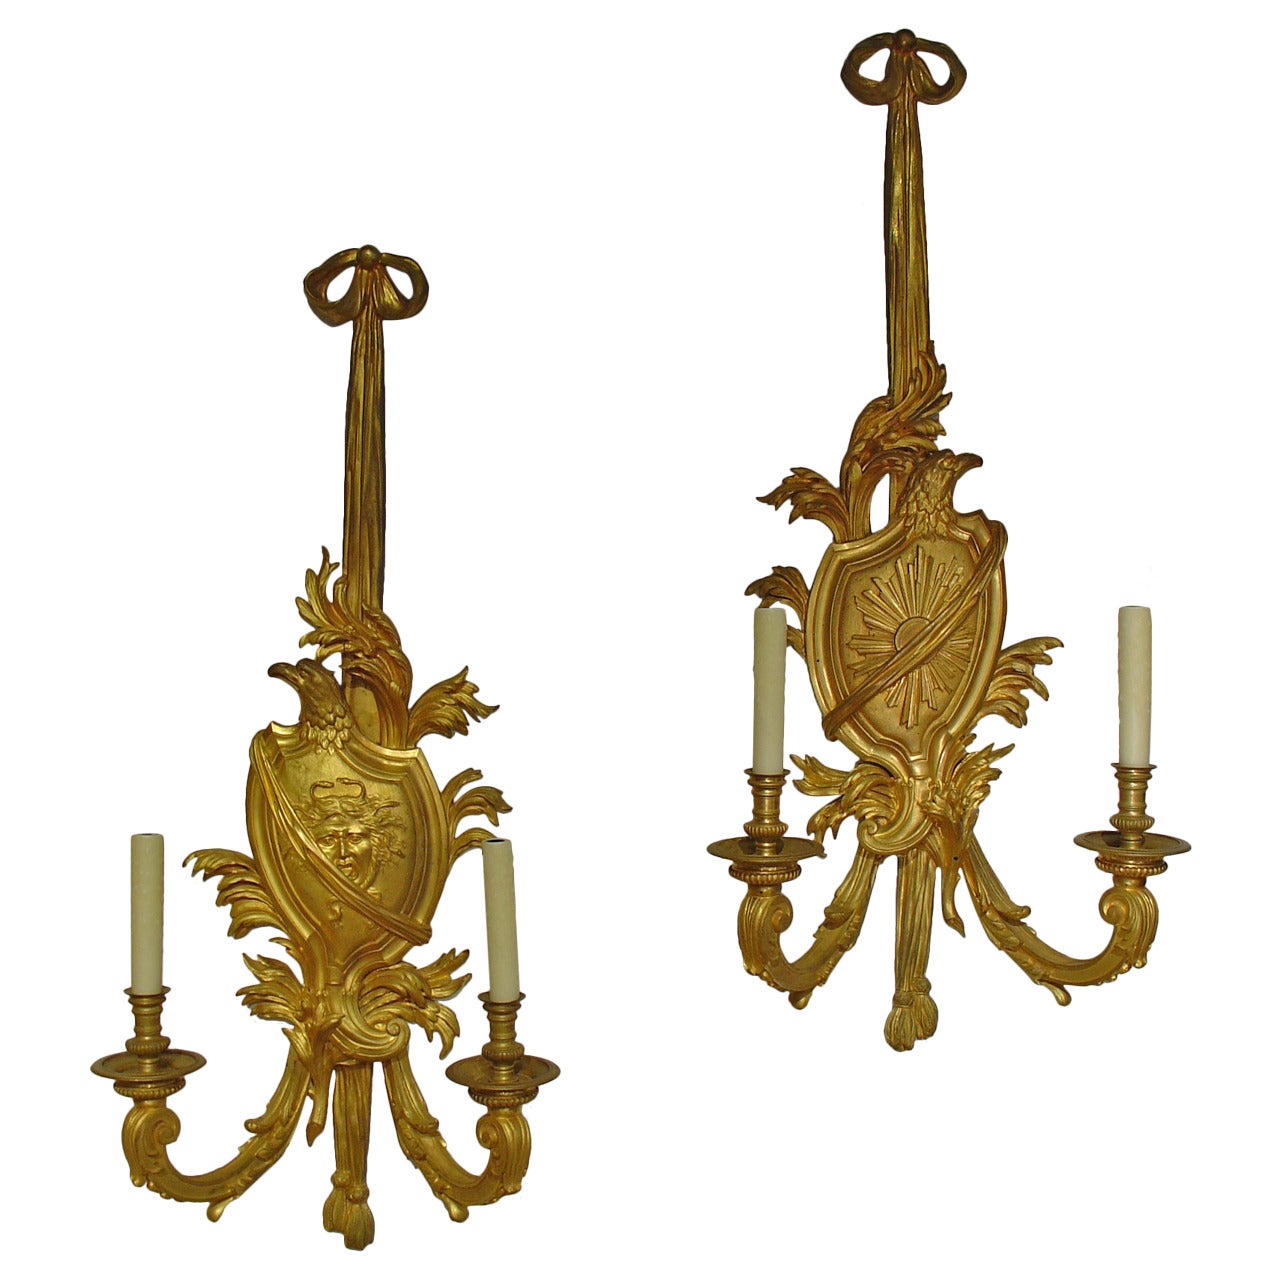 This radiant pair of antique French bronze doré sconces measure about 41” in height! Their style can be considered transitional, since we can see motifs from both Louis XV and Louis XVI (although mostly Louis XVI). The ornamentation on the central